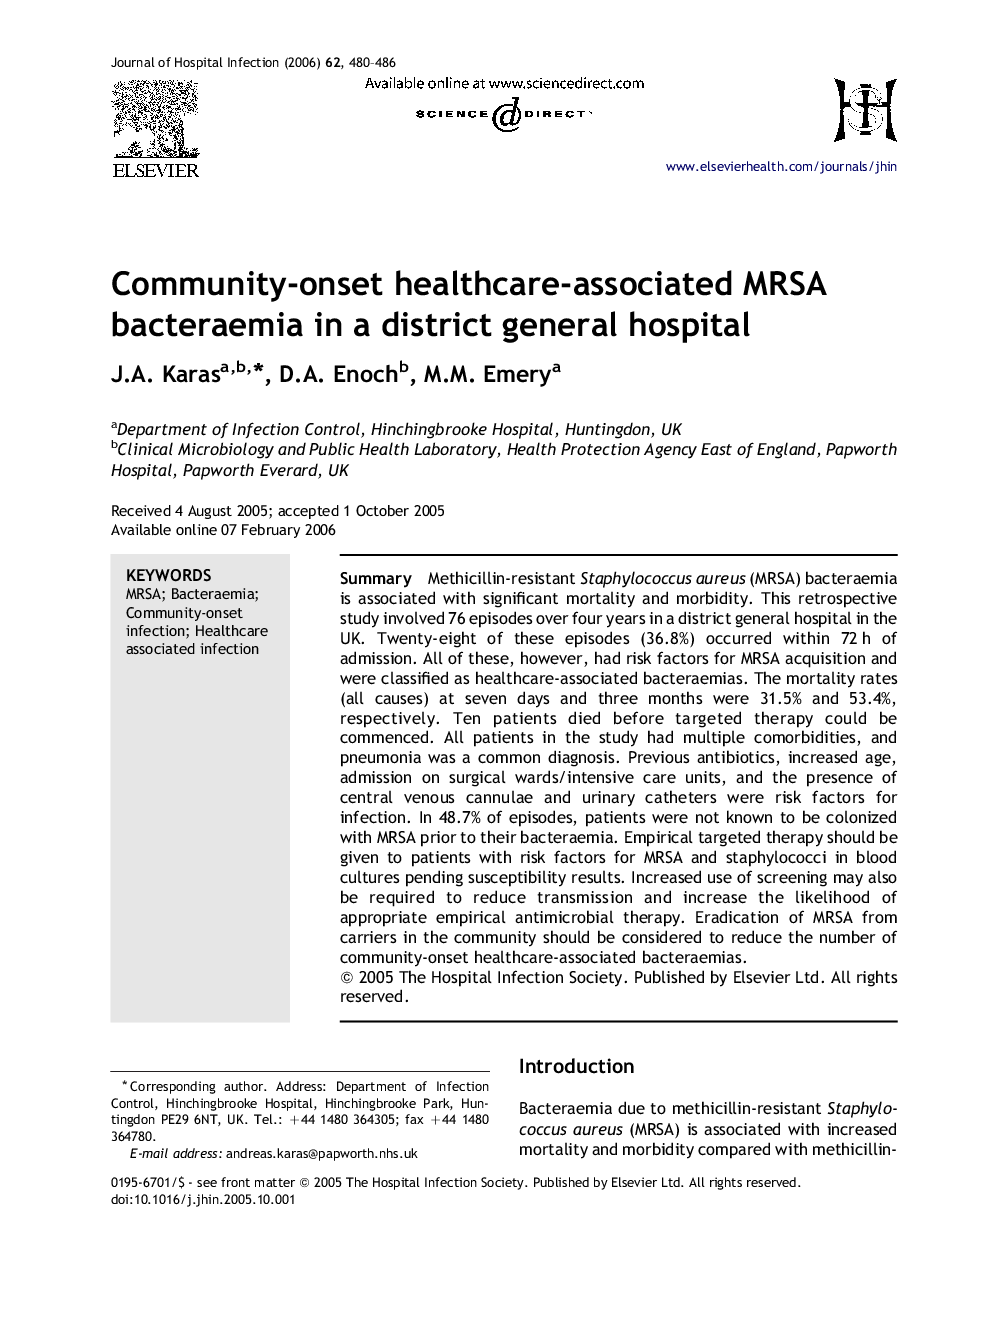 Community-onset healthcare-associated MRSA bacteraemia in a district general hospital